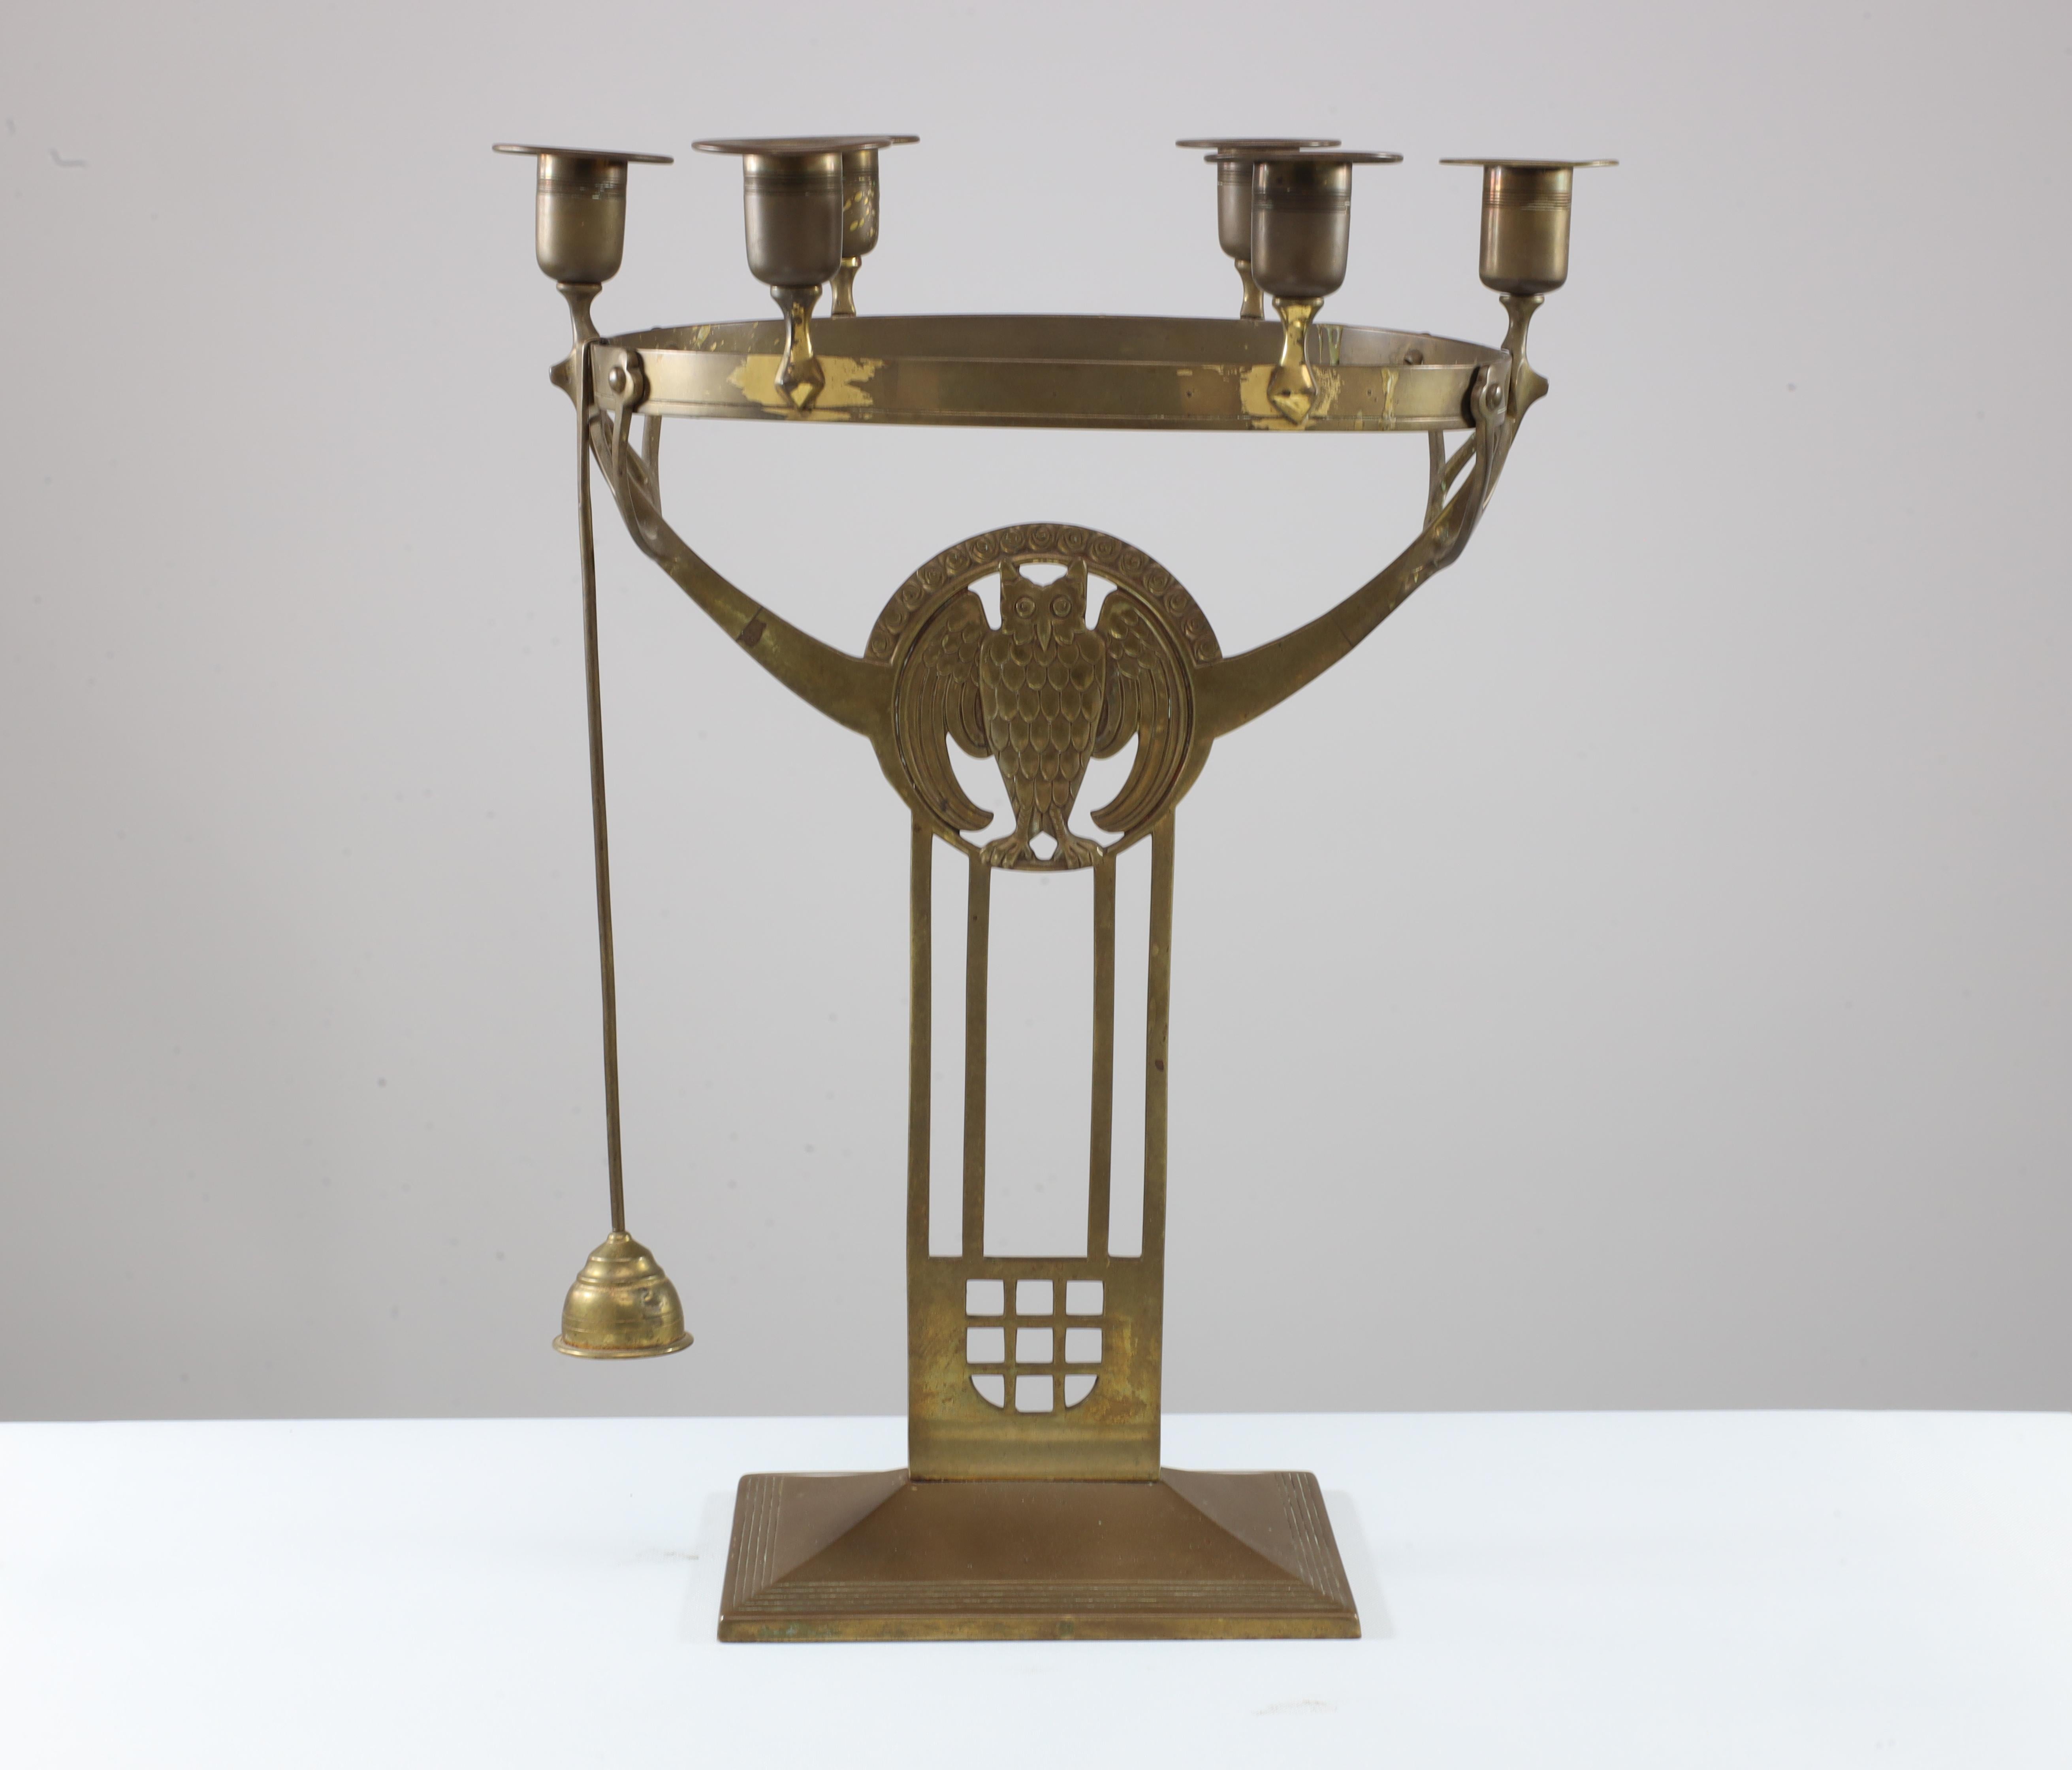 WMF attributed. An Art Nouveau candelabra with six sconces to the main circular ring and sineous supports that meet the arms which rise from the sides of the wise old owl in the center, with twin double supports running down to meet the pierced